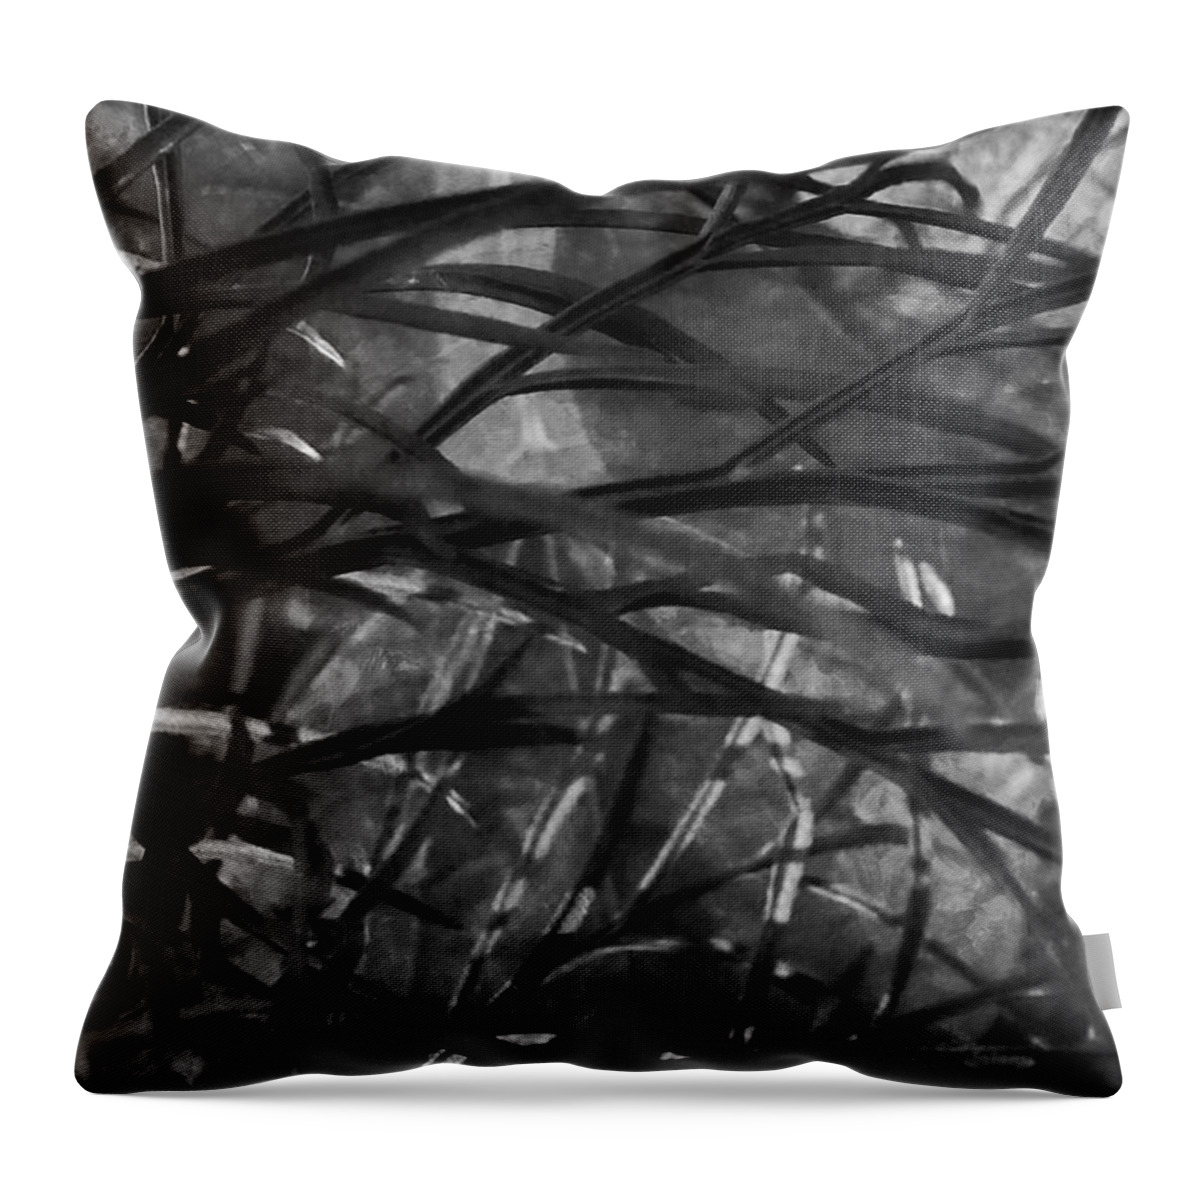 Leaves Throw Pillow featuring the photograph A Spider's Eye by Steve Taylor